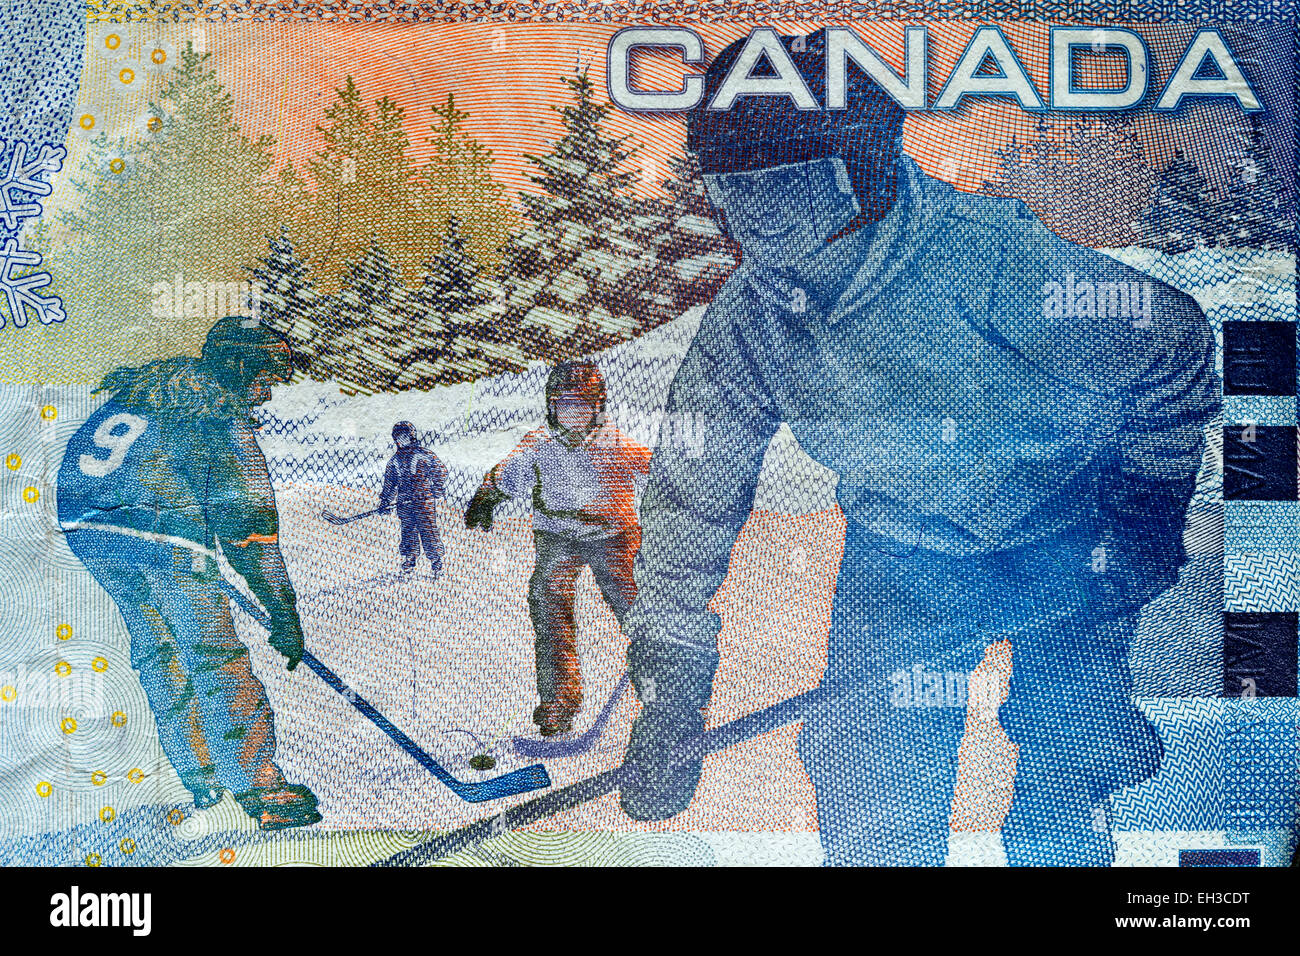 Ice Hockey players from 5 dollars banknote, Canada, 2008 Stock Photo